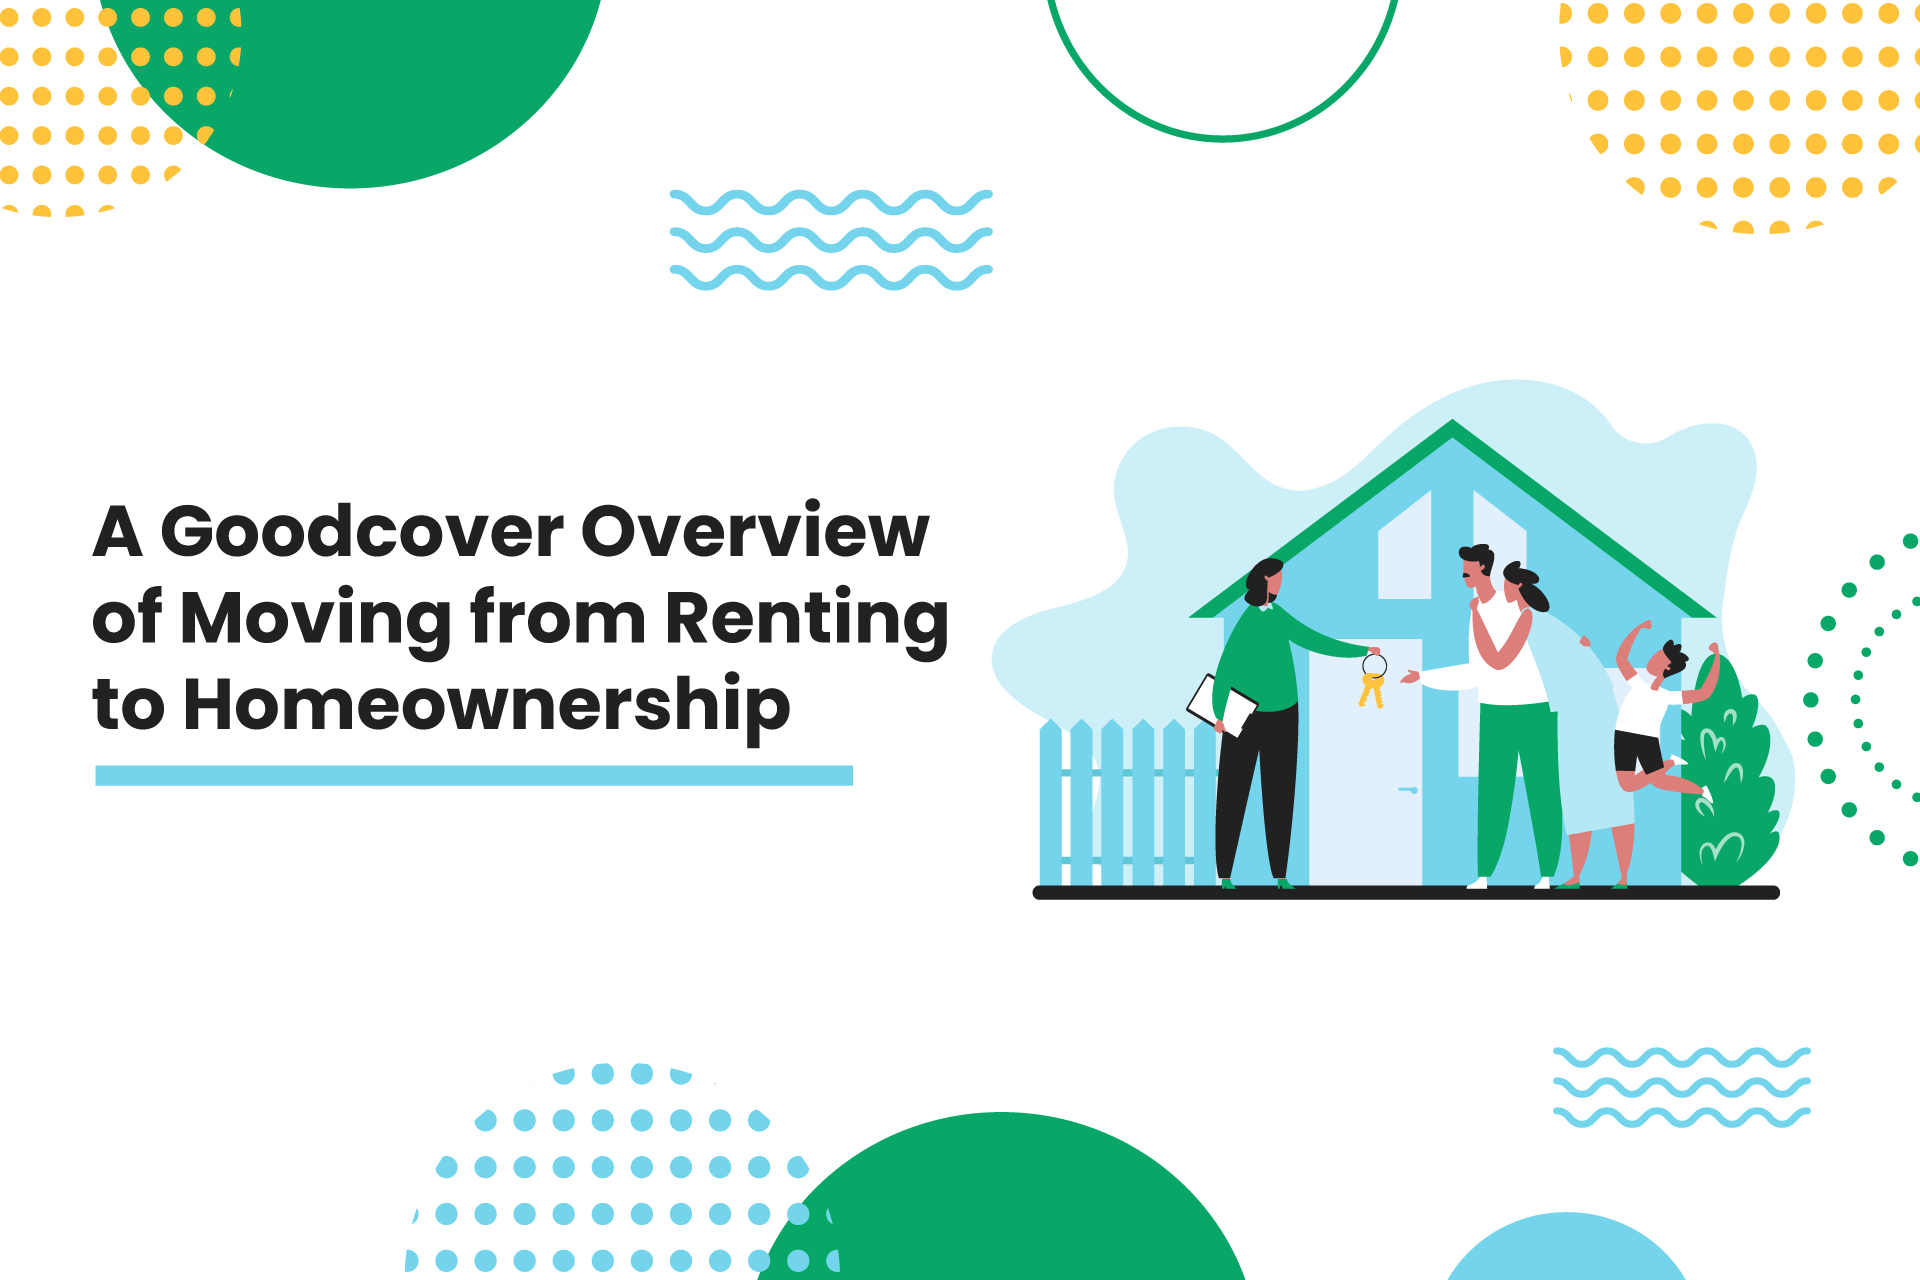 A Goodcover Overview of Moving from Renting to Homeownership